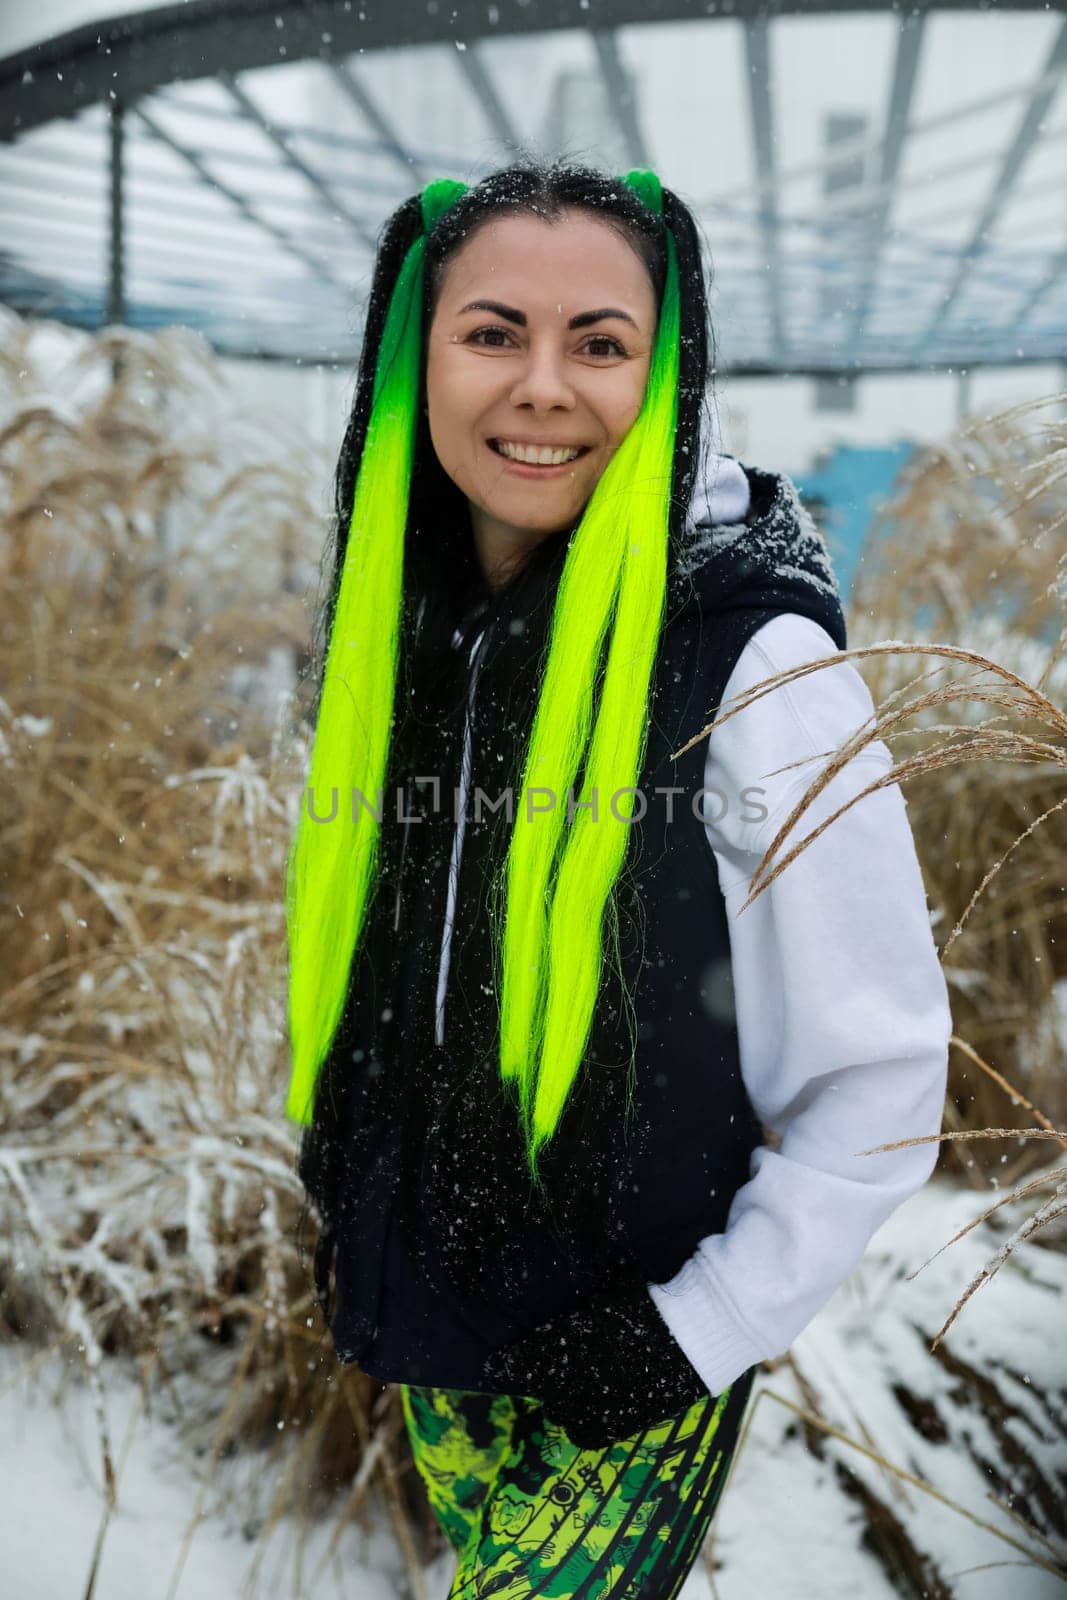 A woman with vivid green hair stands in the midst of a snowy landscape, her striking hair contrasting against the white snow. She gazes ahead, embodying a sense of strength and resilience in the cold winter setting.